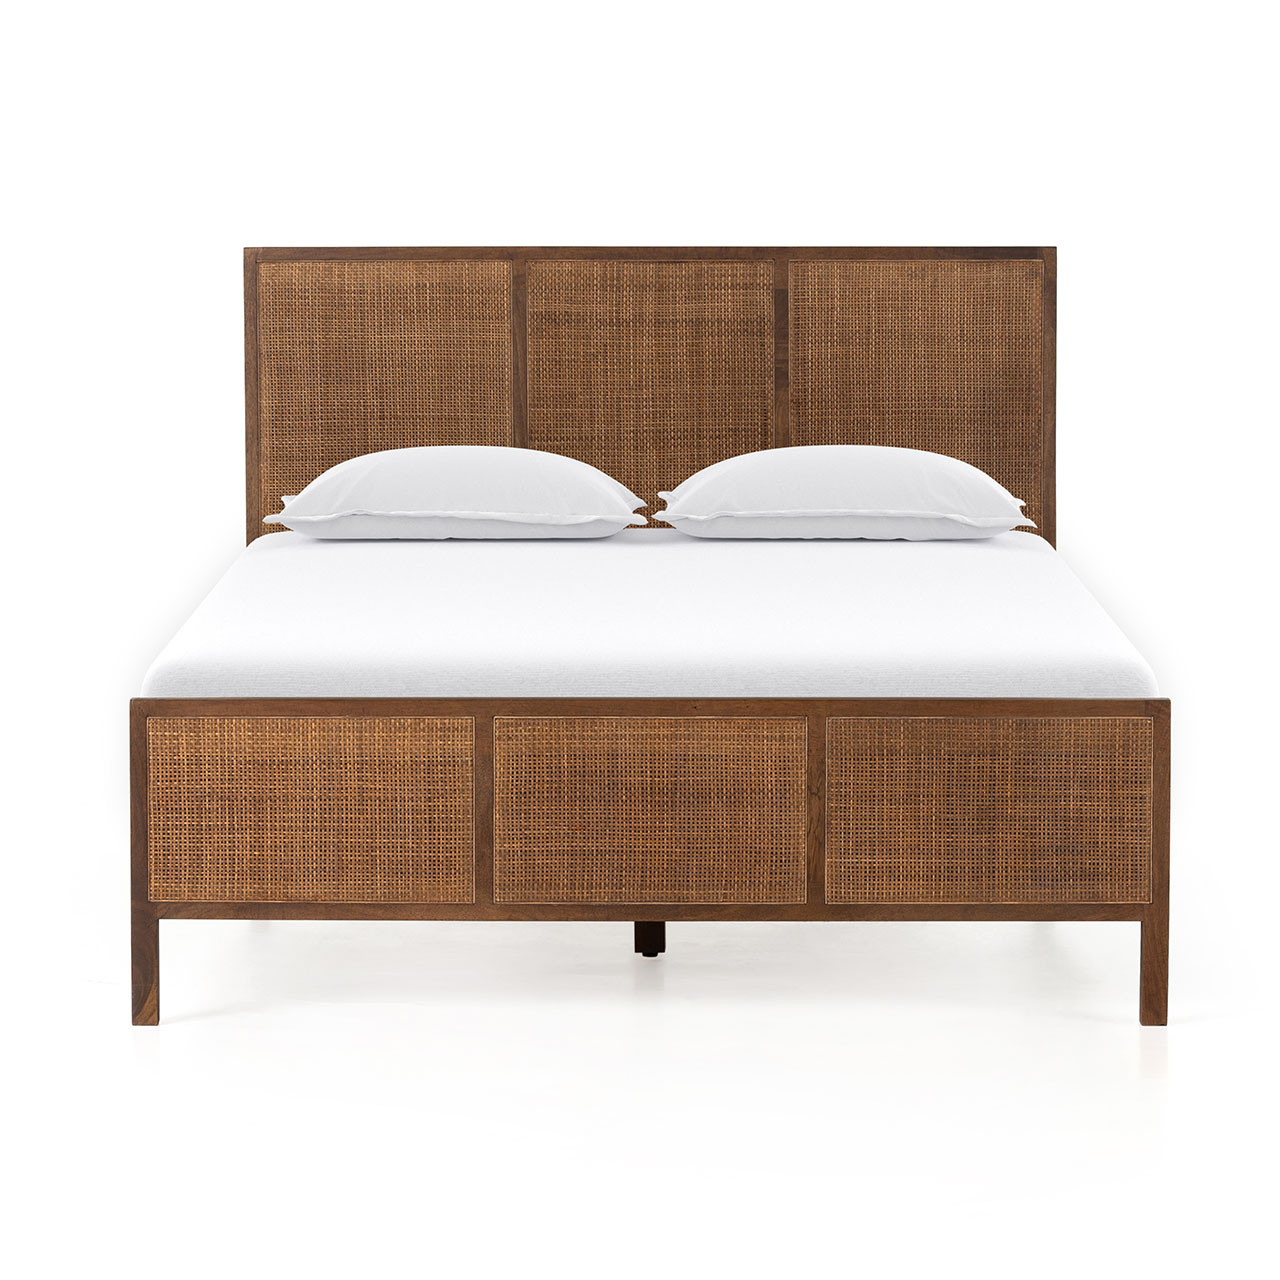 Bondi Woven Cane Bed features a solid natural mango wood frame in a brown wash finish contrasting with inlaid natural woven cane for a coastal contemporary inspired style bedroom.